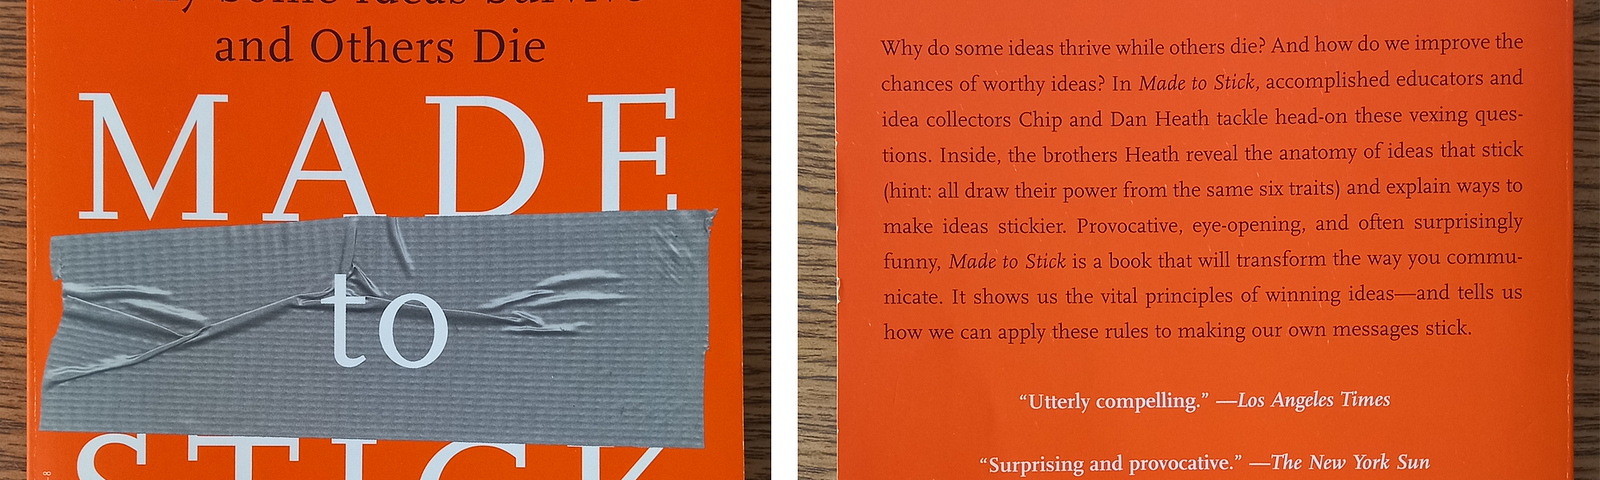 Front and back covers of Made to Stick by Chip Heath and Dan Heath, with a really good blurb enlarged and pasted on both book covers